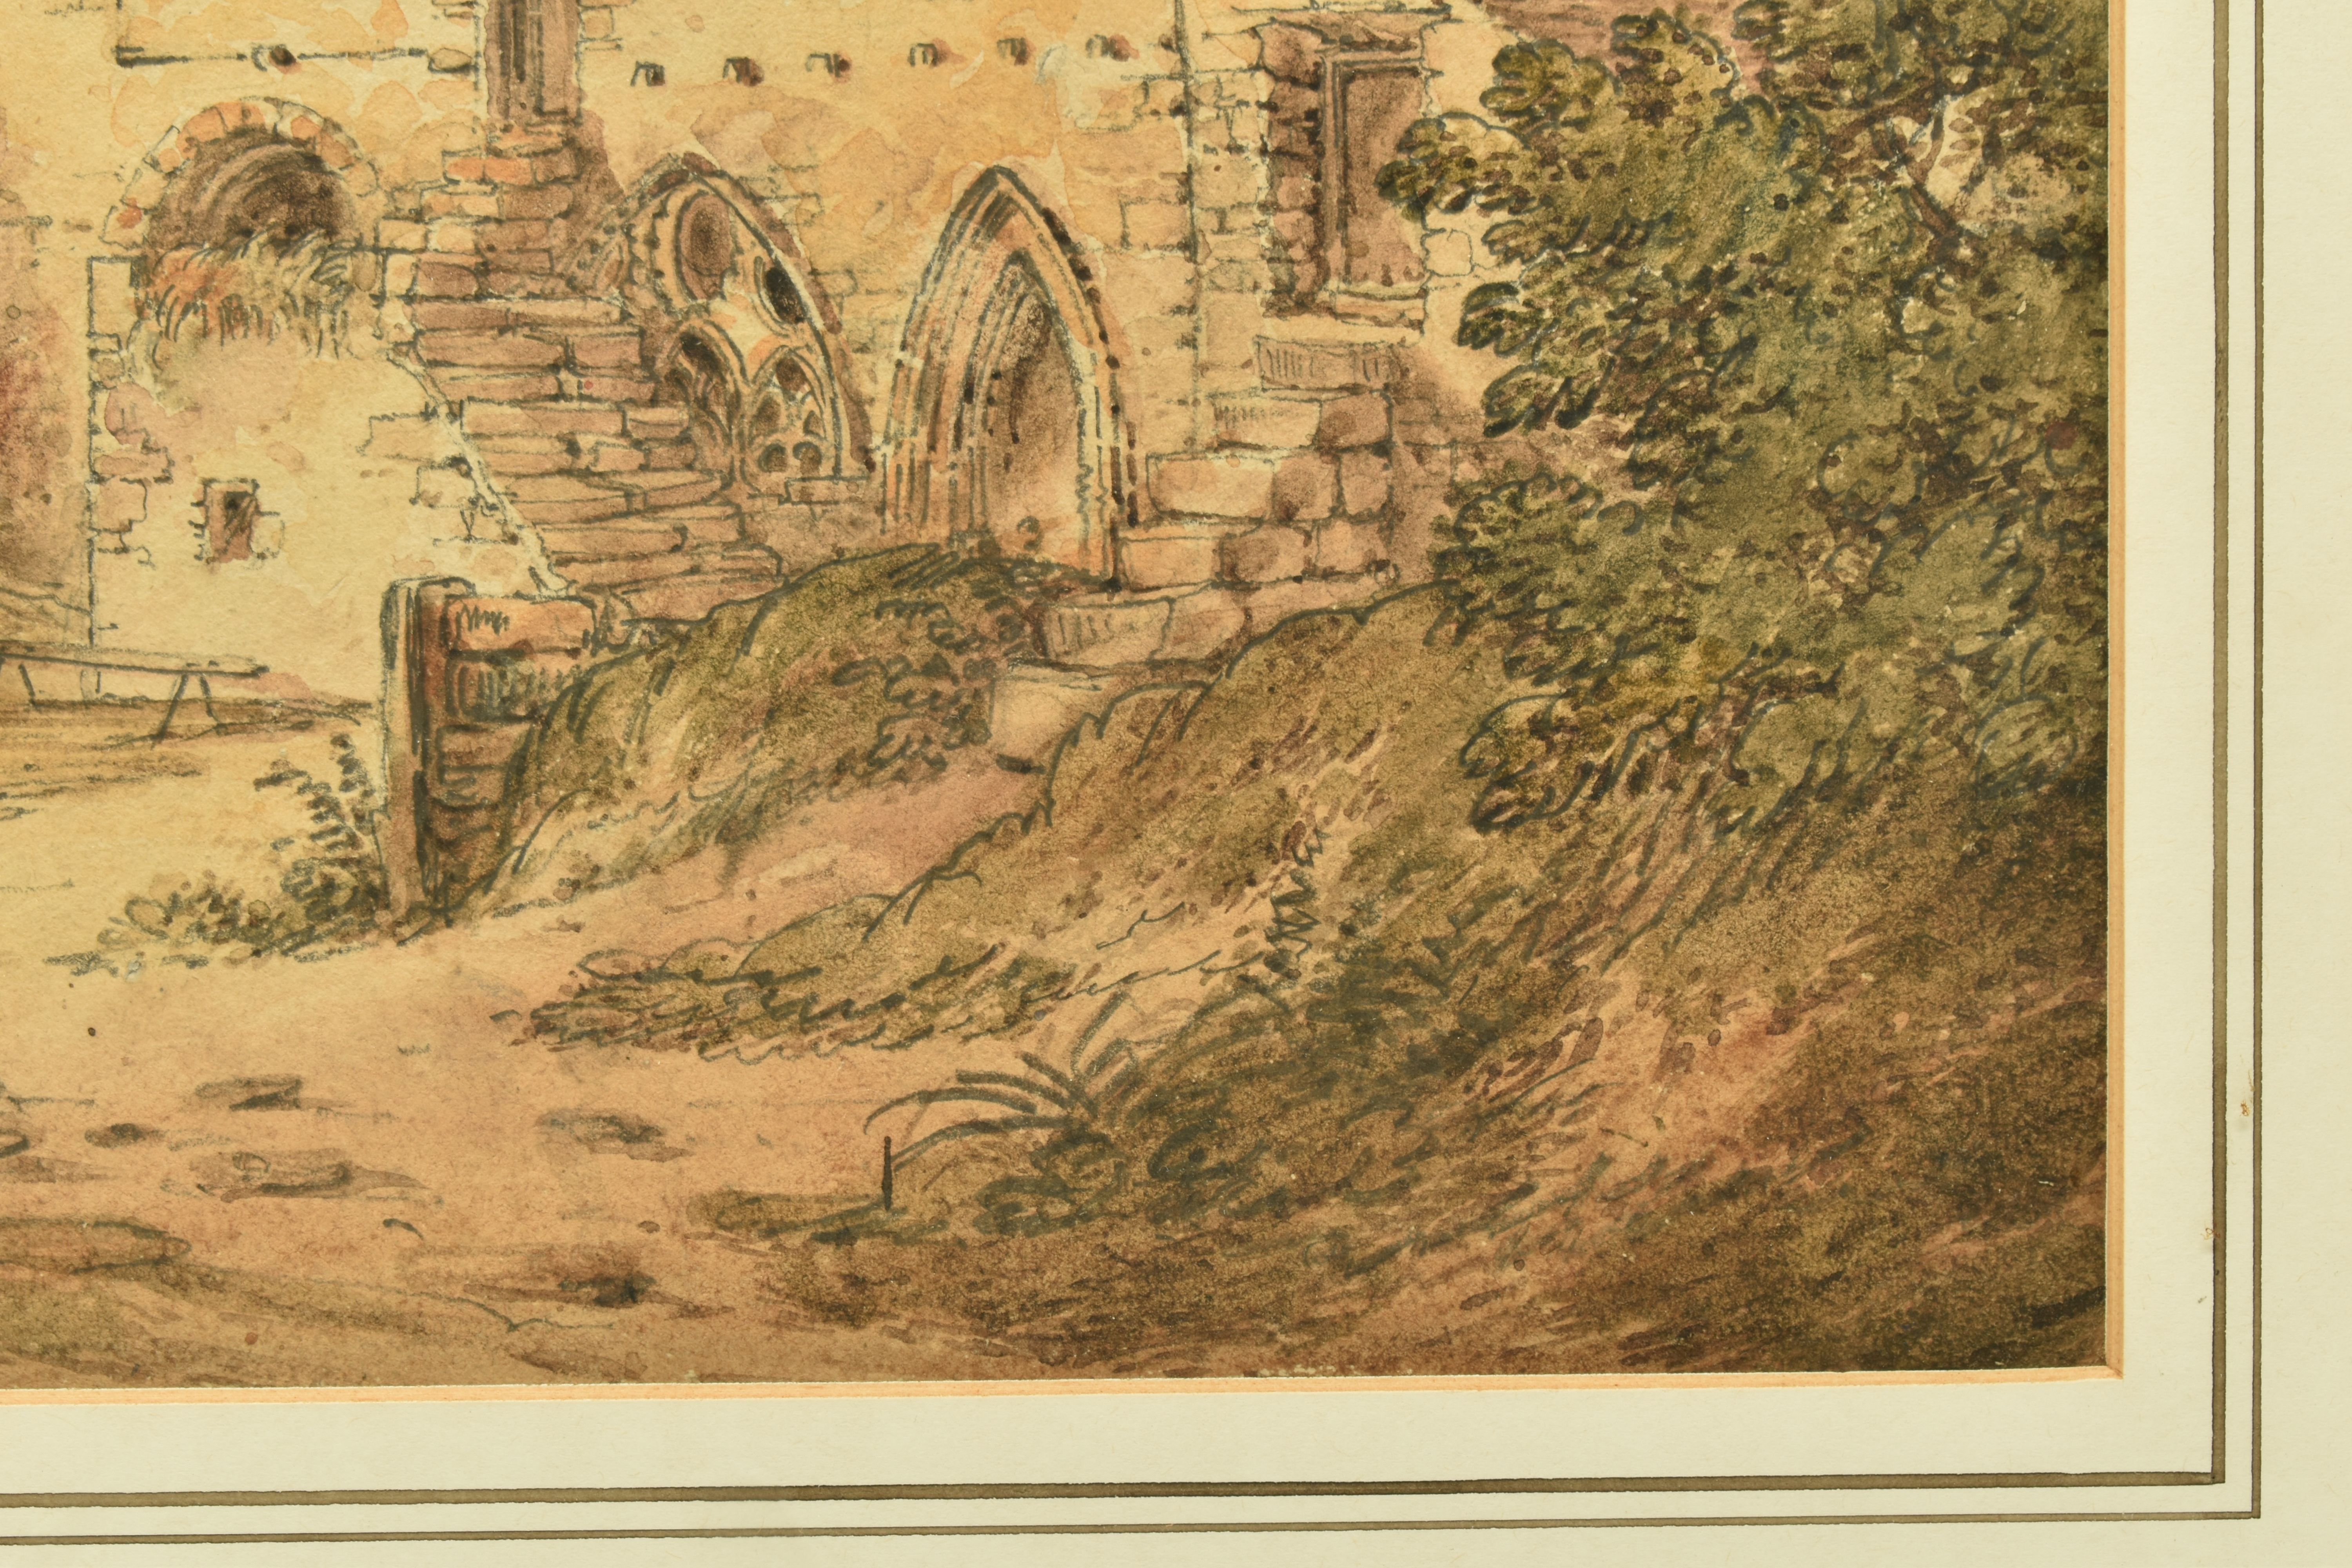 ATTRIBUTED TO JAMES BOURNE (1773-1854), 'VALLE CRUCIS ABBEY', a Welsh landscape near Llangollen, - Image 5 of 8